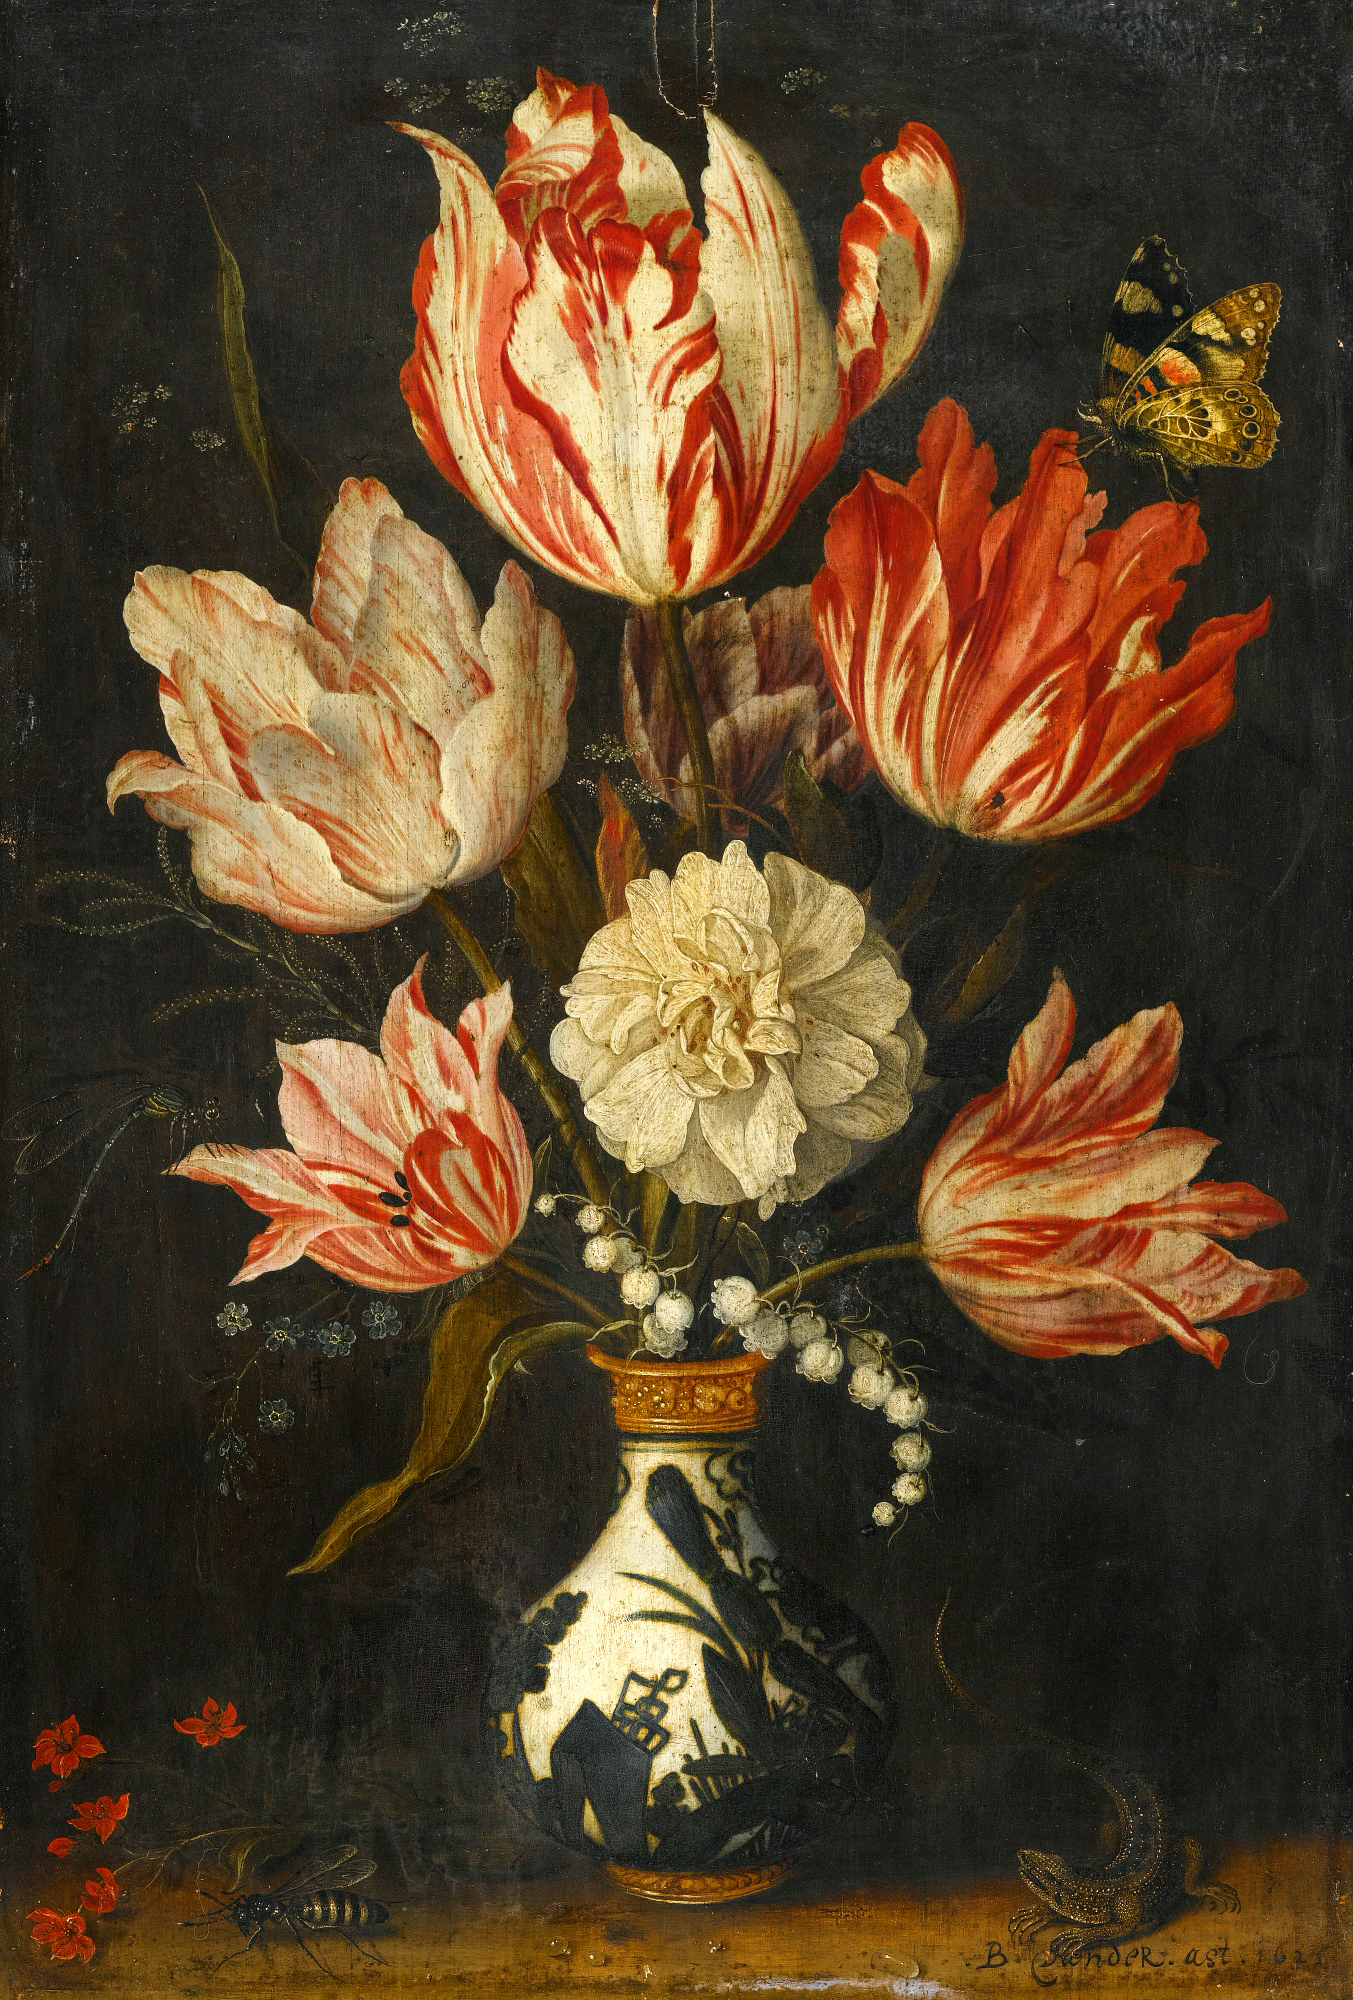 a still life of flowers in a vase with a erfly on the flower stem